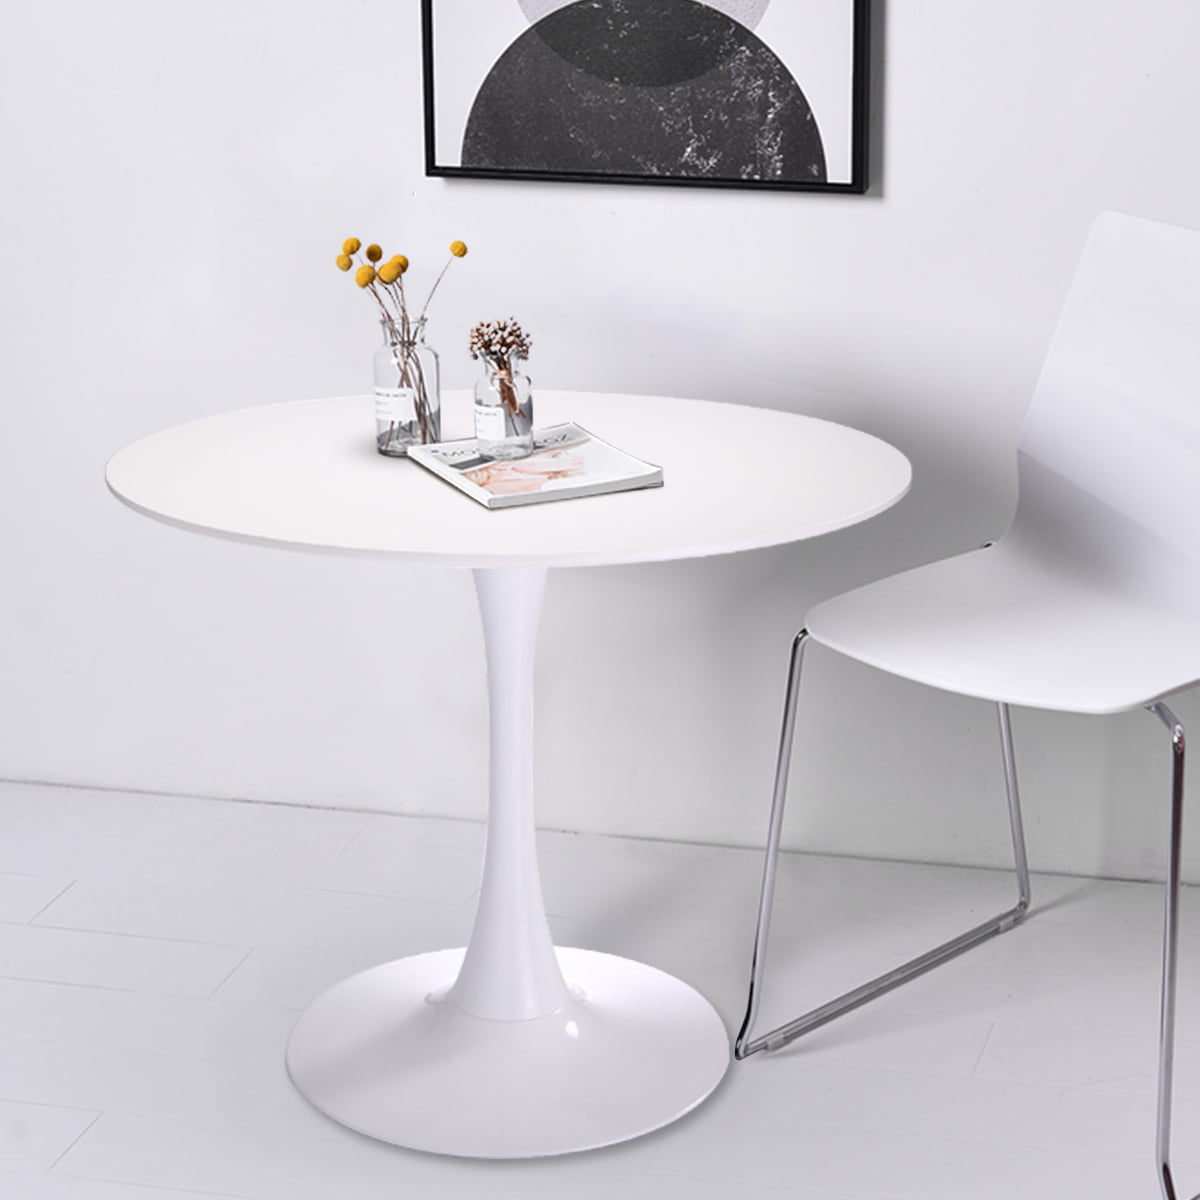 Tobbi 32 Inch Round Tulip Dining Table Coffee Table in White Elegant Furniture